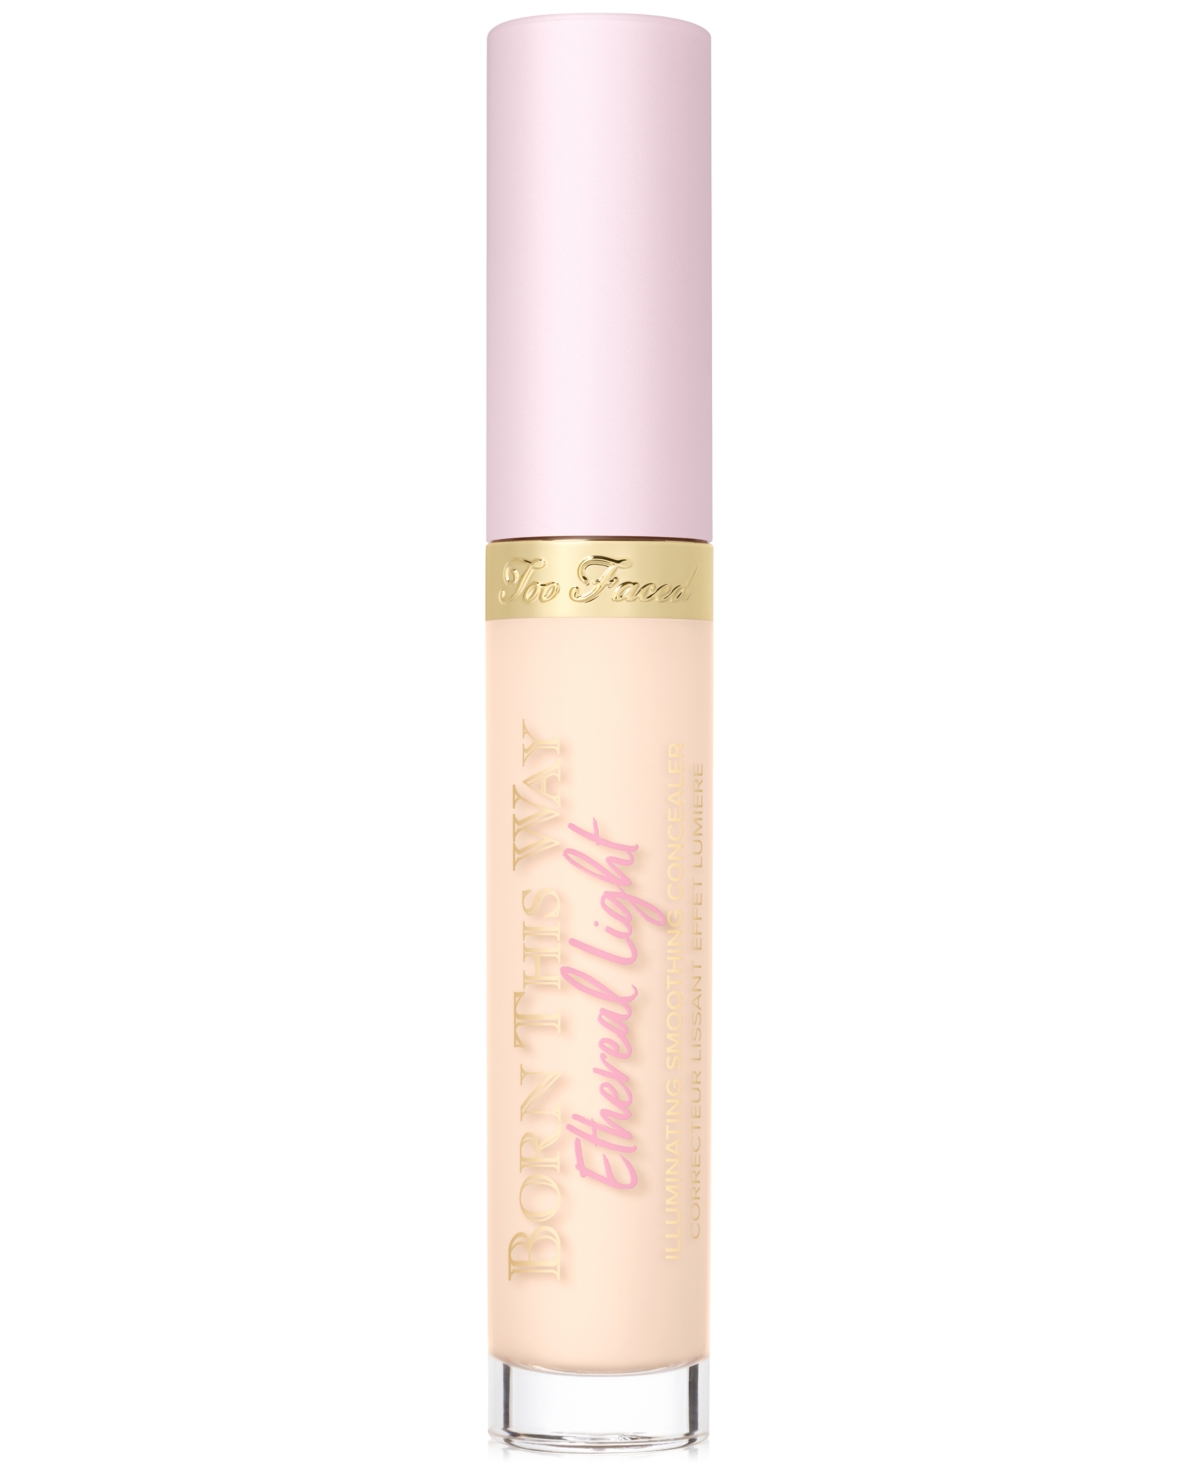 Too Faced Born This Way Ethereal Light Illuminating Smoothing Concealer In Sugar - Fairest With Rosy Undertones